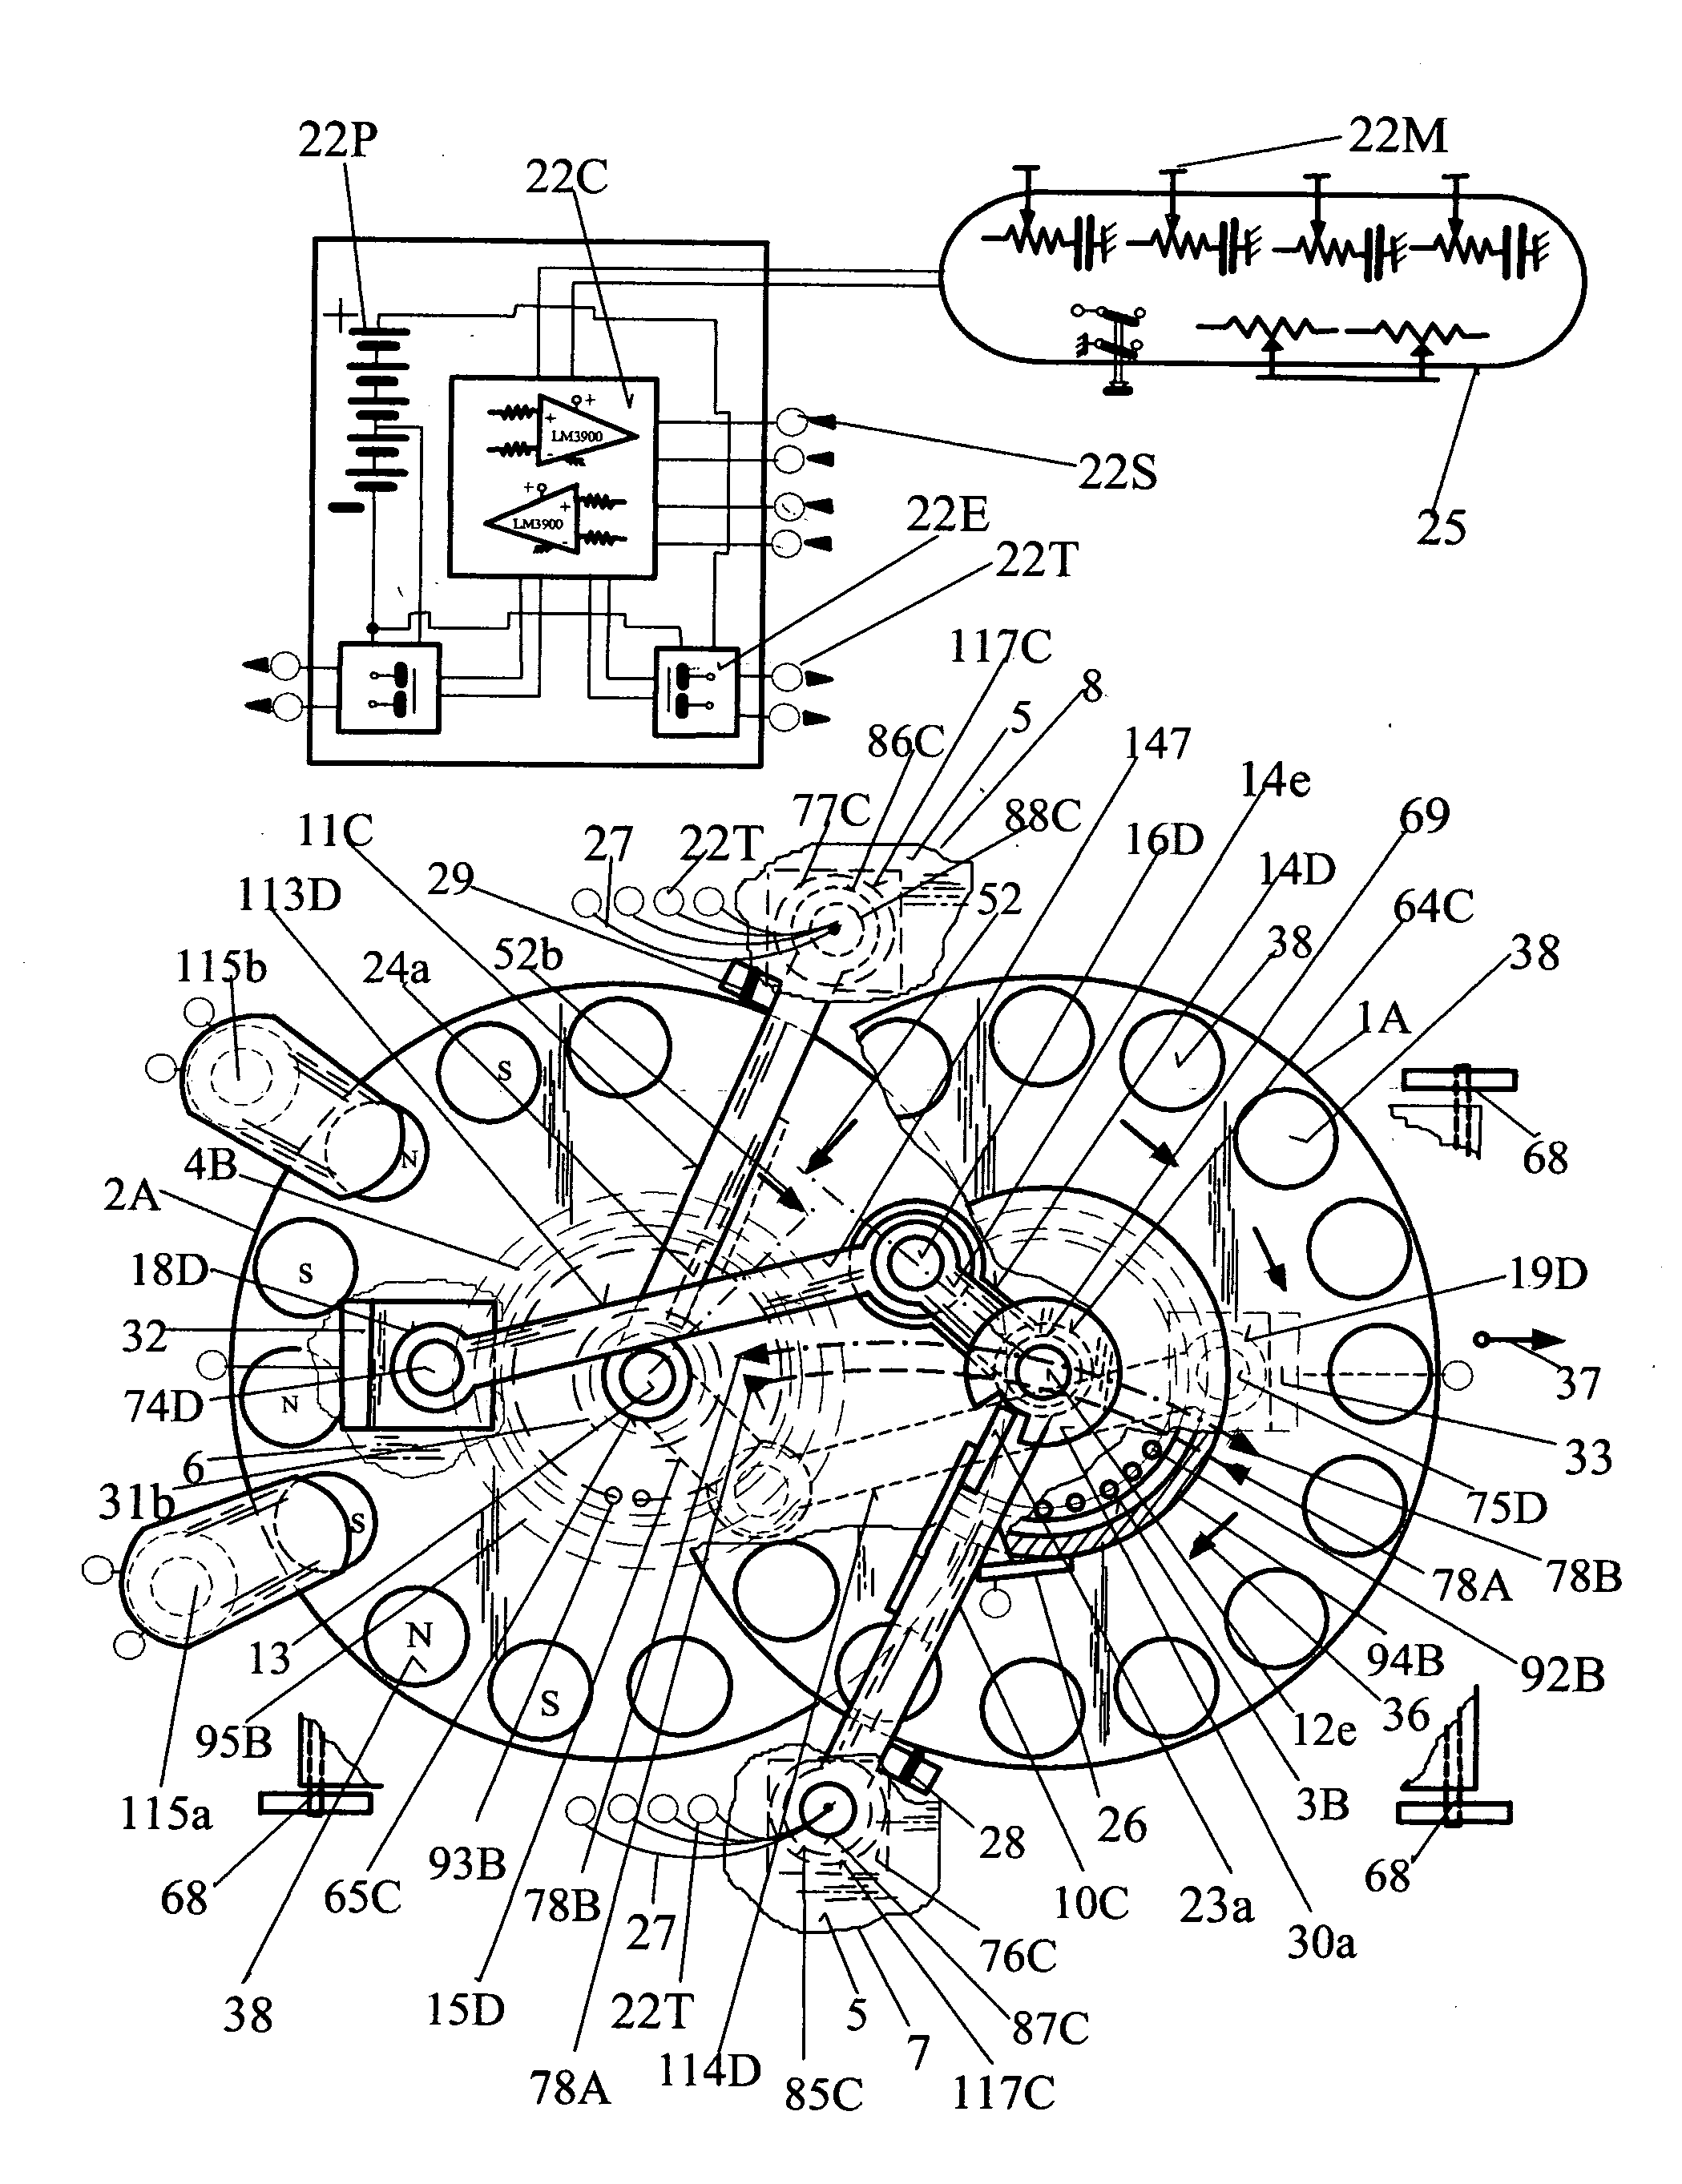 Device for the study of self-contained inertial vehicular propulsion